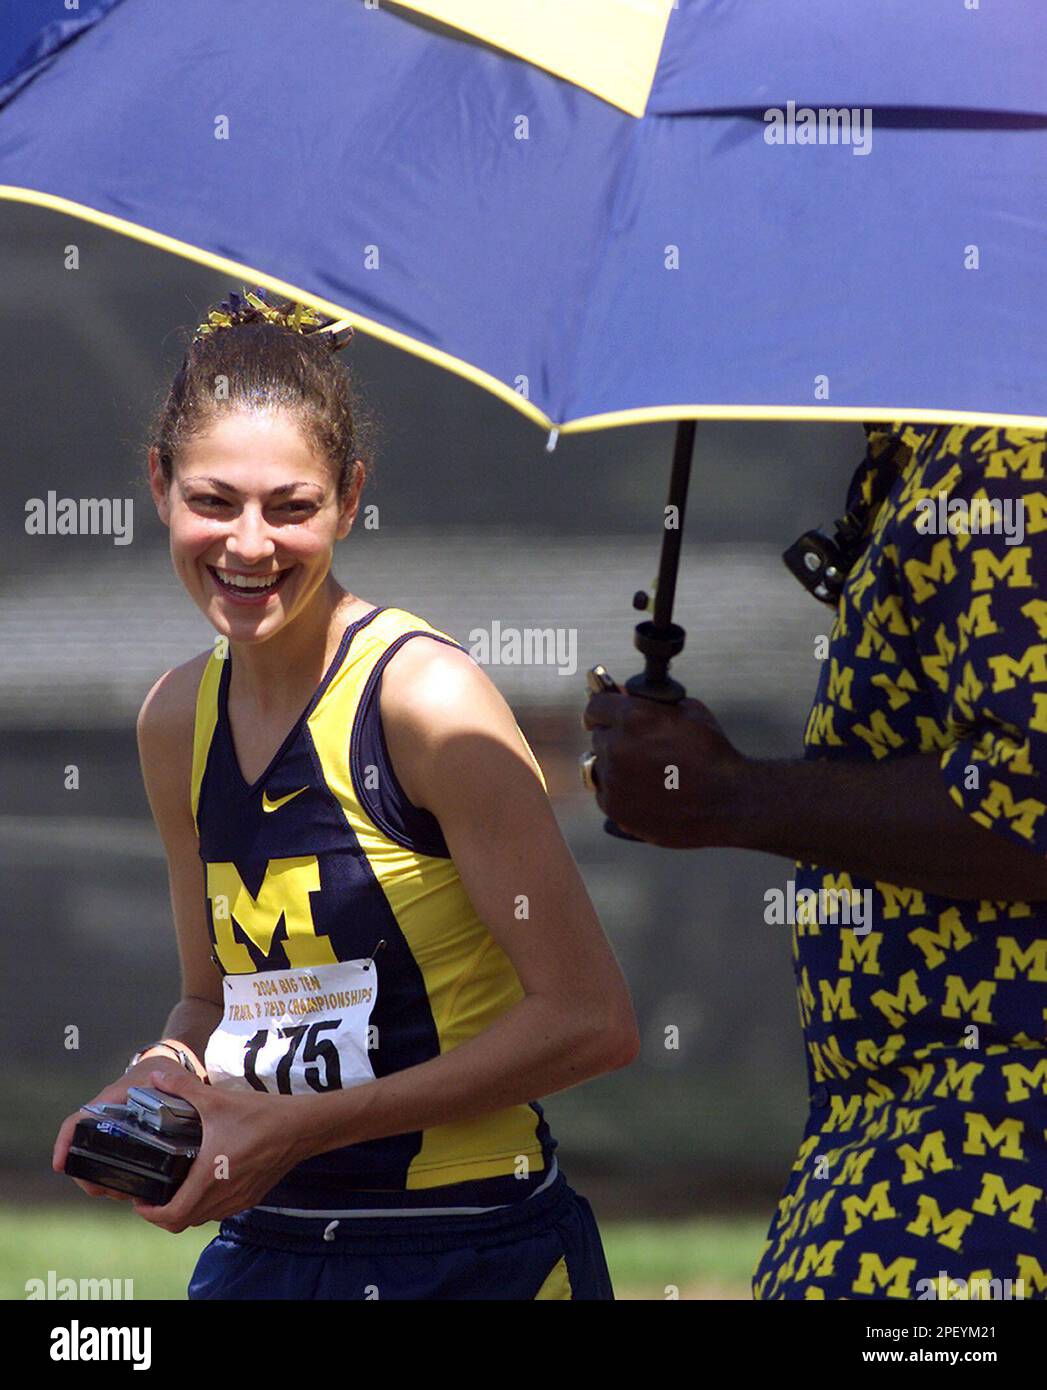 Lindsey Gallo of Michigan talks to one of her coaches Sunday, May 16, 2004, after winning the 1,500 and 800-meter runs at the the Big Ten Conference Mens and Womens Track and Field Championships in West Lafayette, Ind. (AP Photo/Journal and Courier, Michael Heinz) Stock Photo